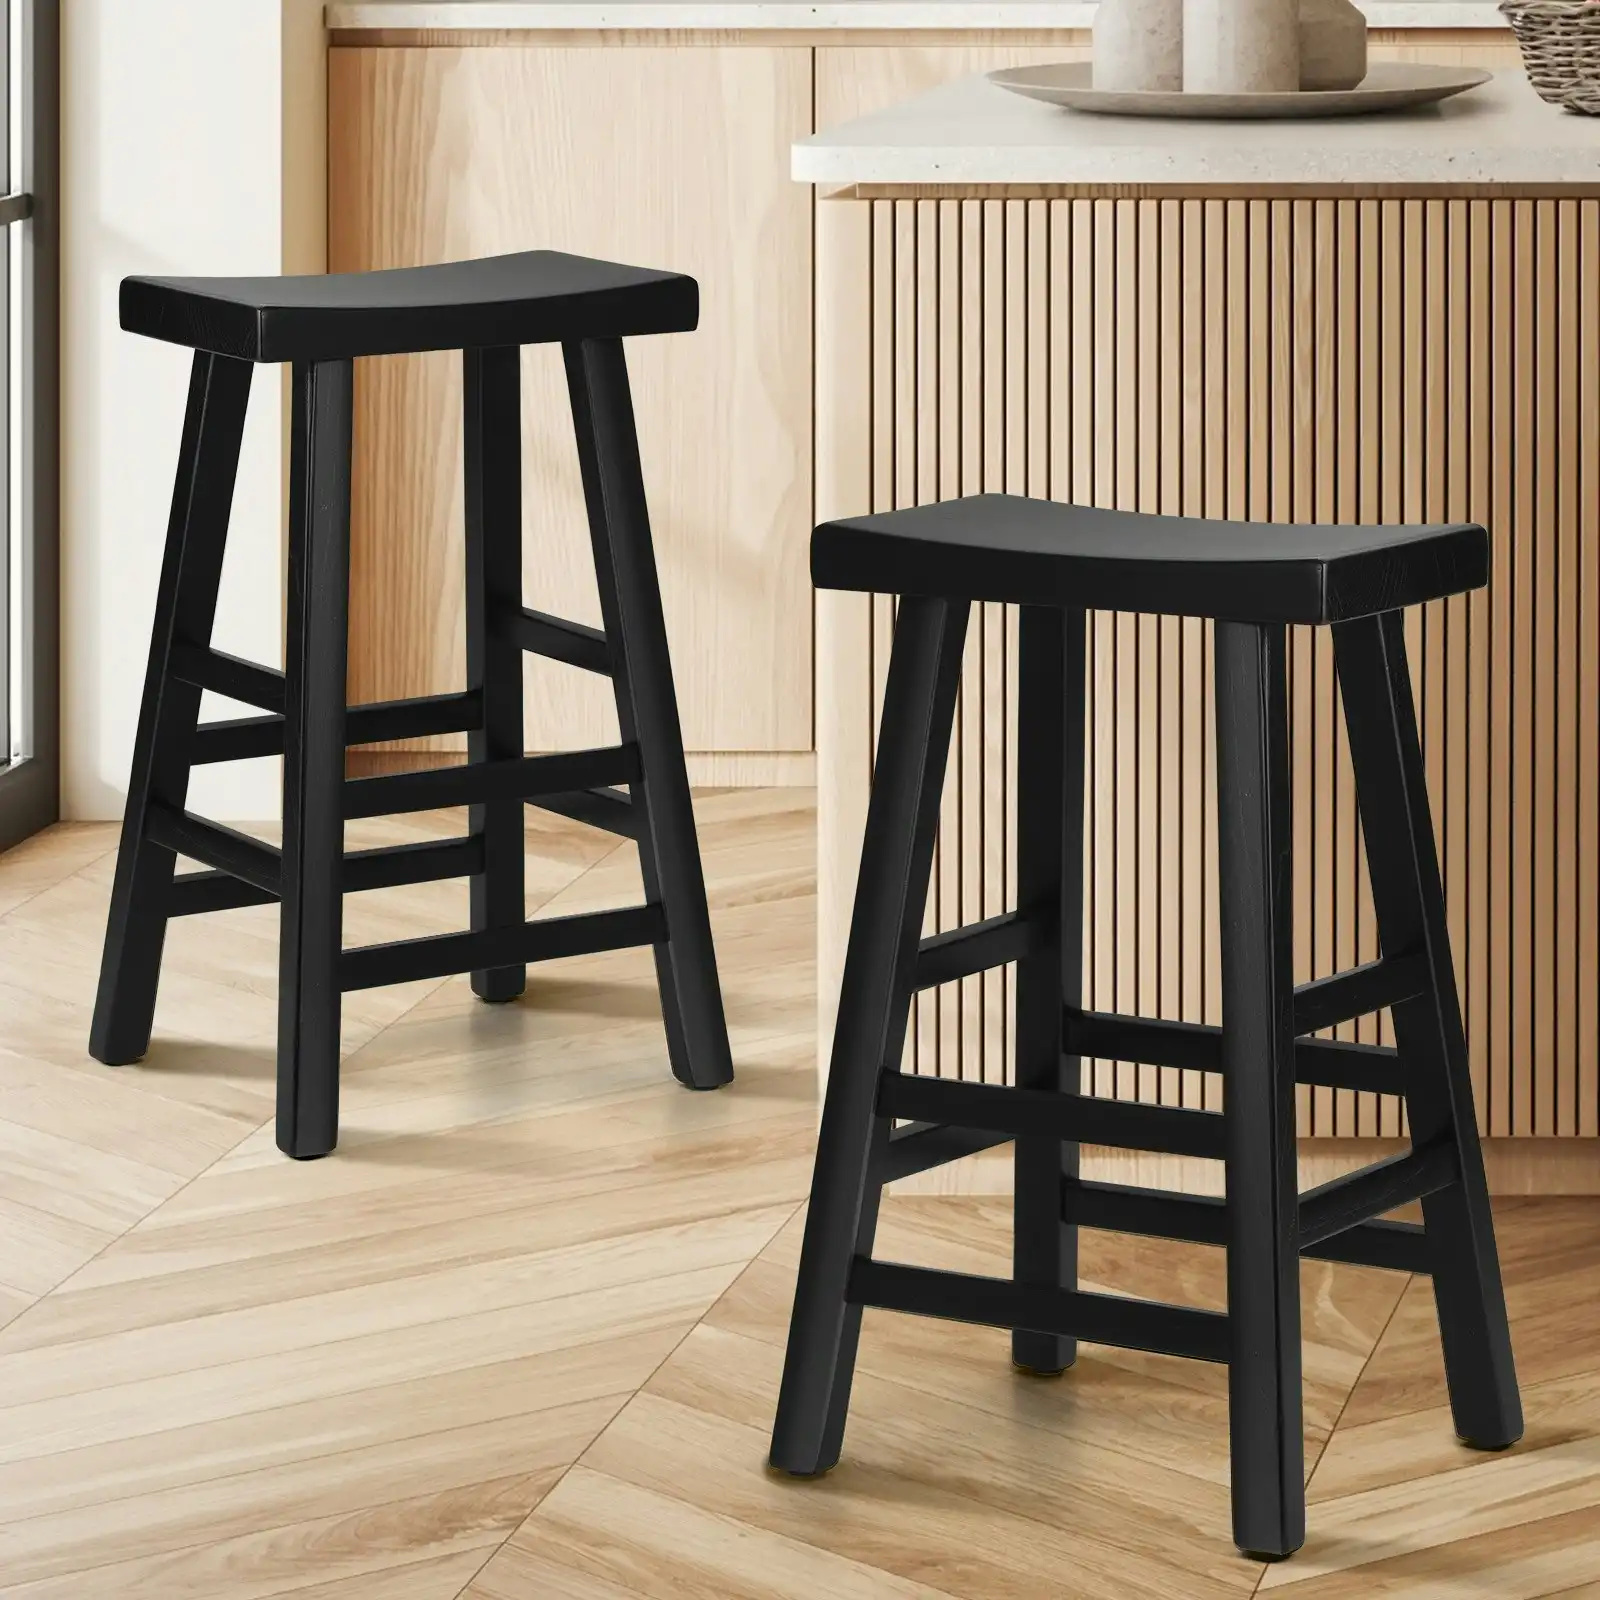 Oikiture 2X Bar Stools Kitchen Stool Wooden Counter Chairs Barstools Black